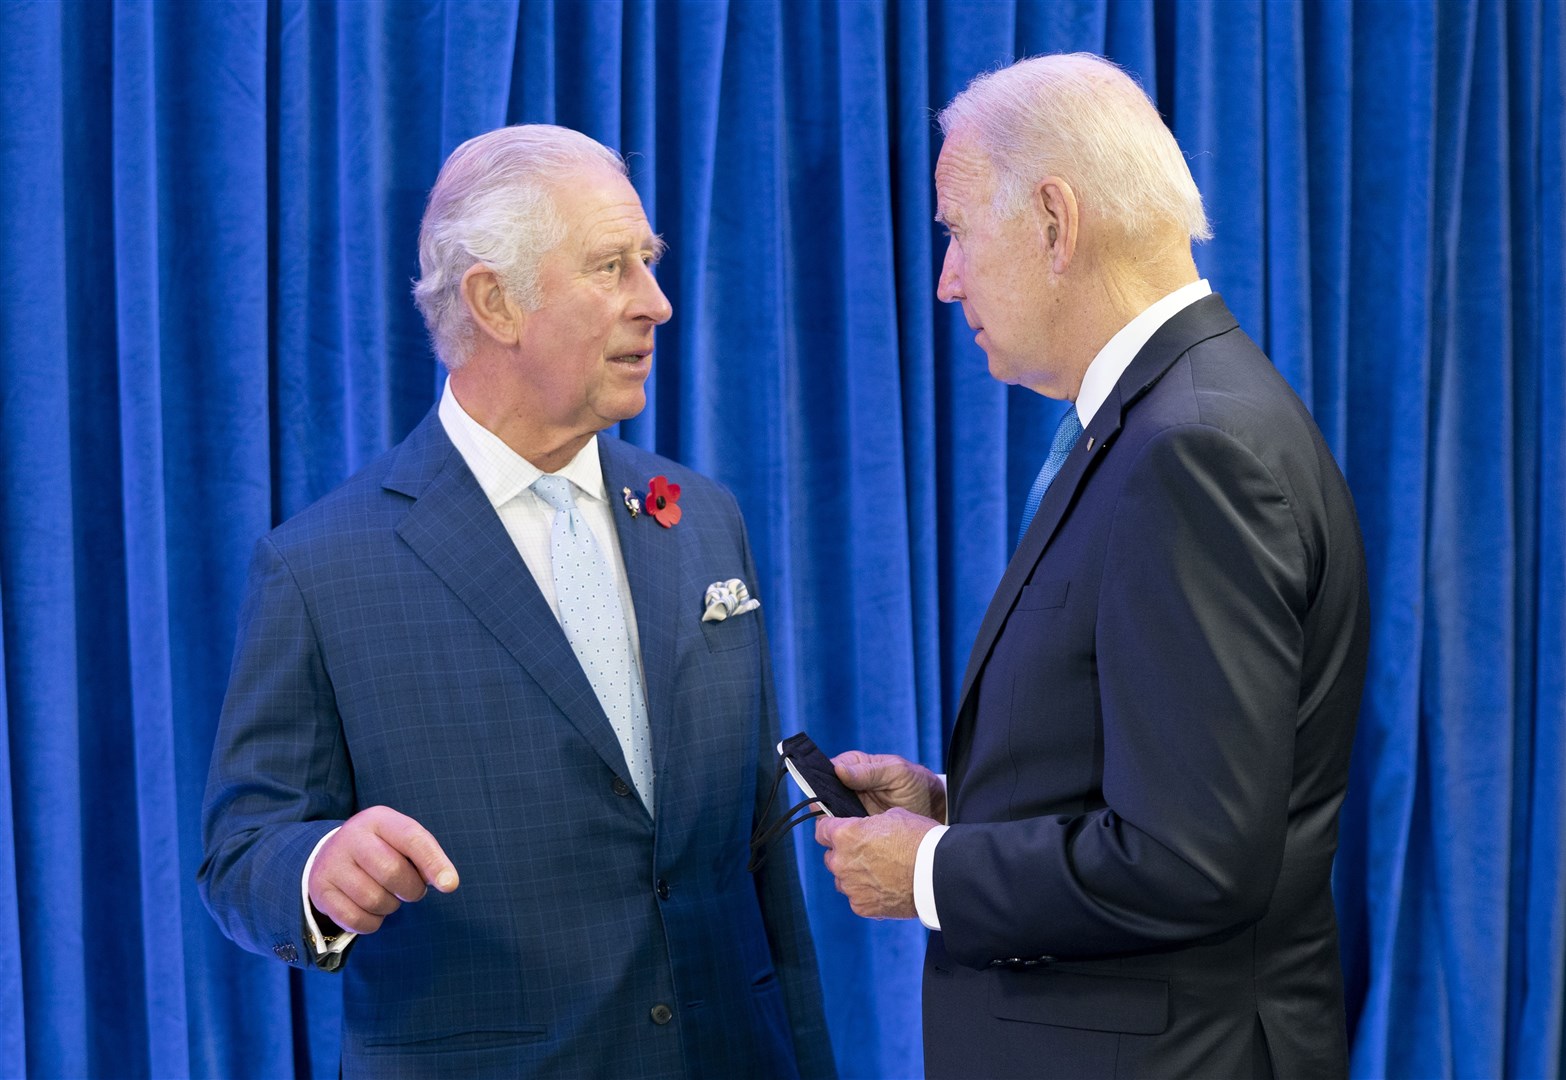 The then Prince of Wales (now King Charles III) with President of the United States Joe Biden in 2021 (Jane Barlow/ PA)